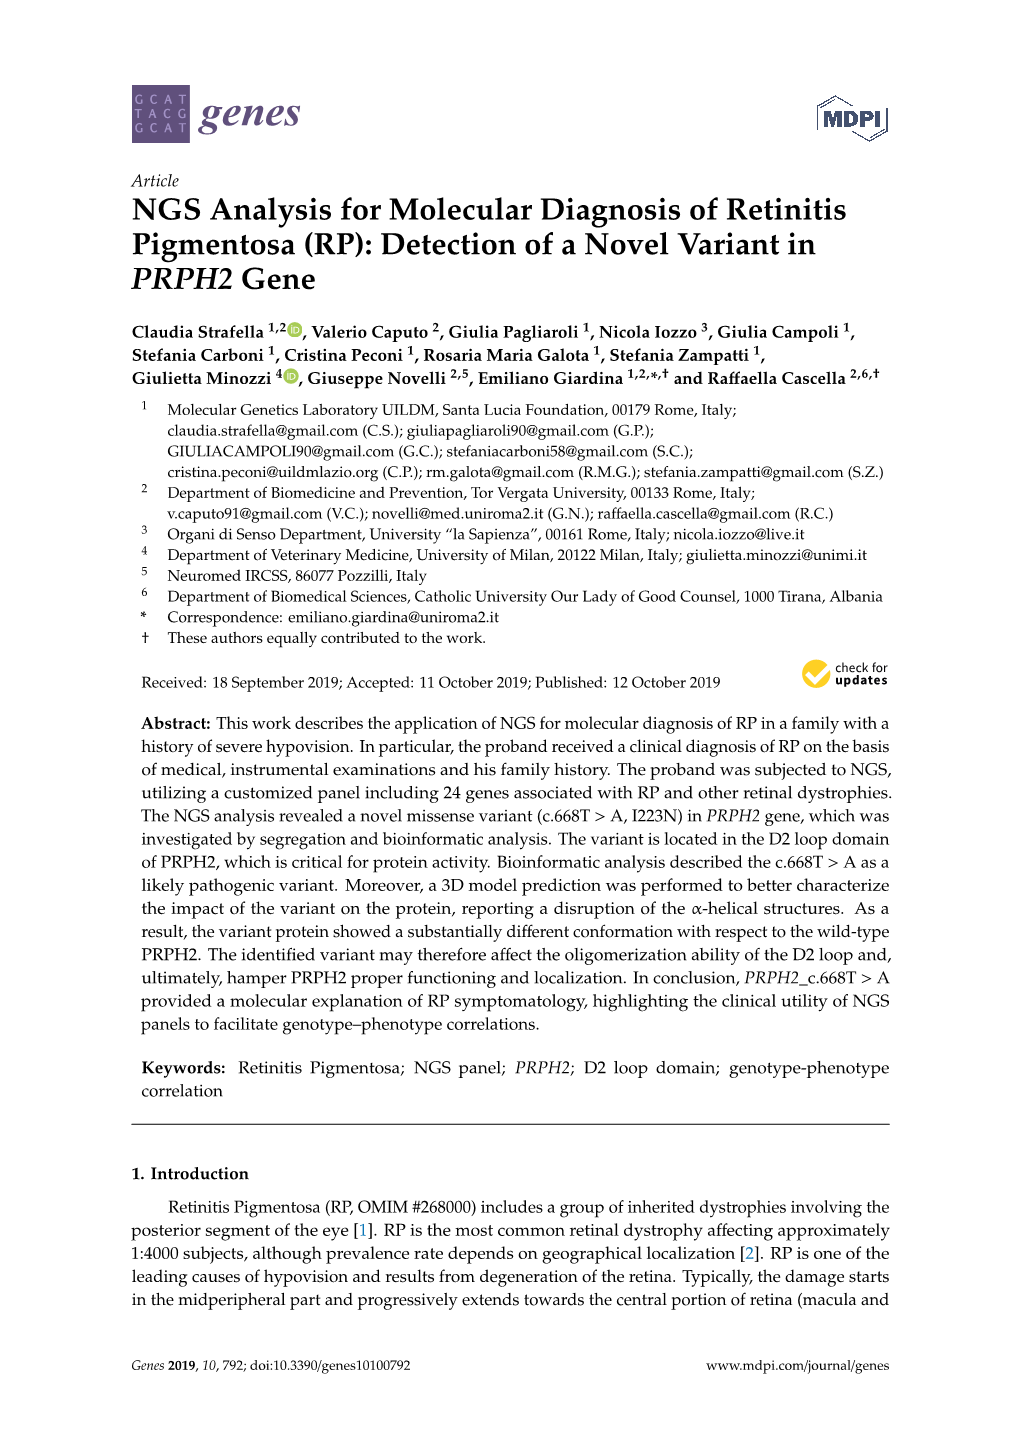 NGS Analysis for Molecular Diagnosis of Retinitis Pigmentosa (RP): Detection of a Novel Variant in PRPH2 Gene